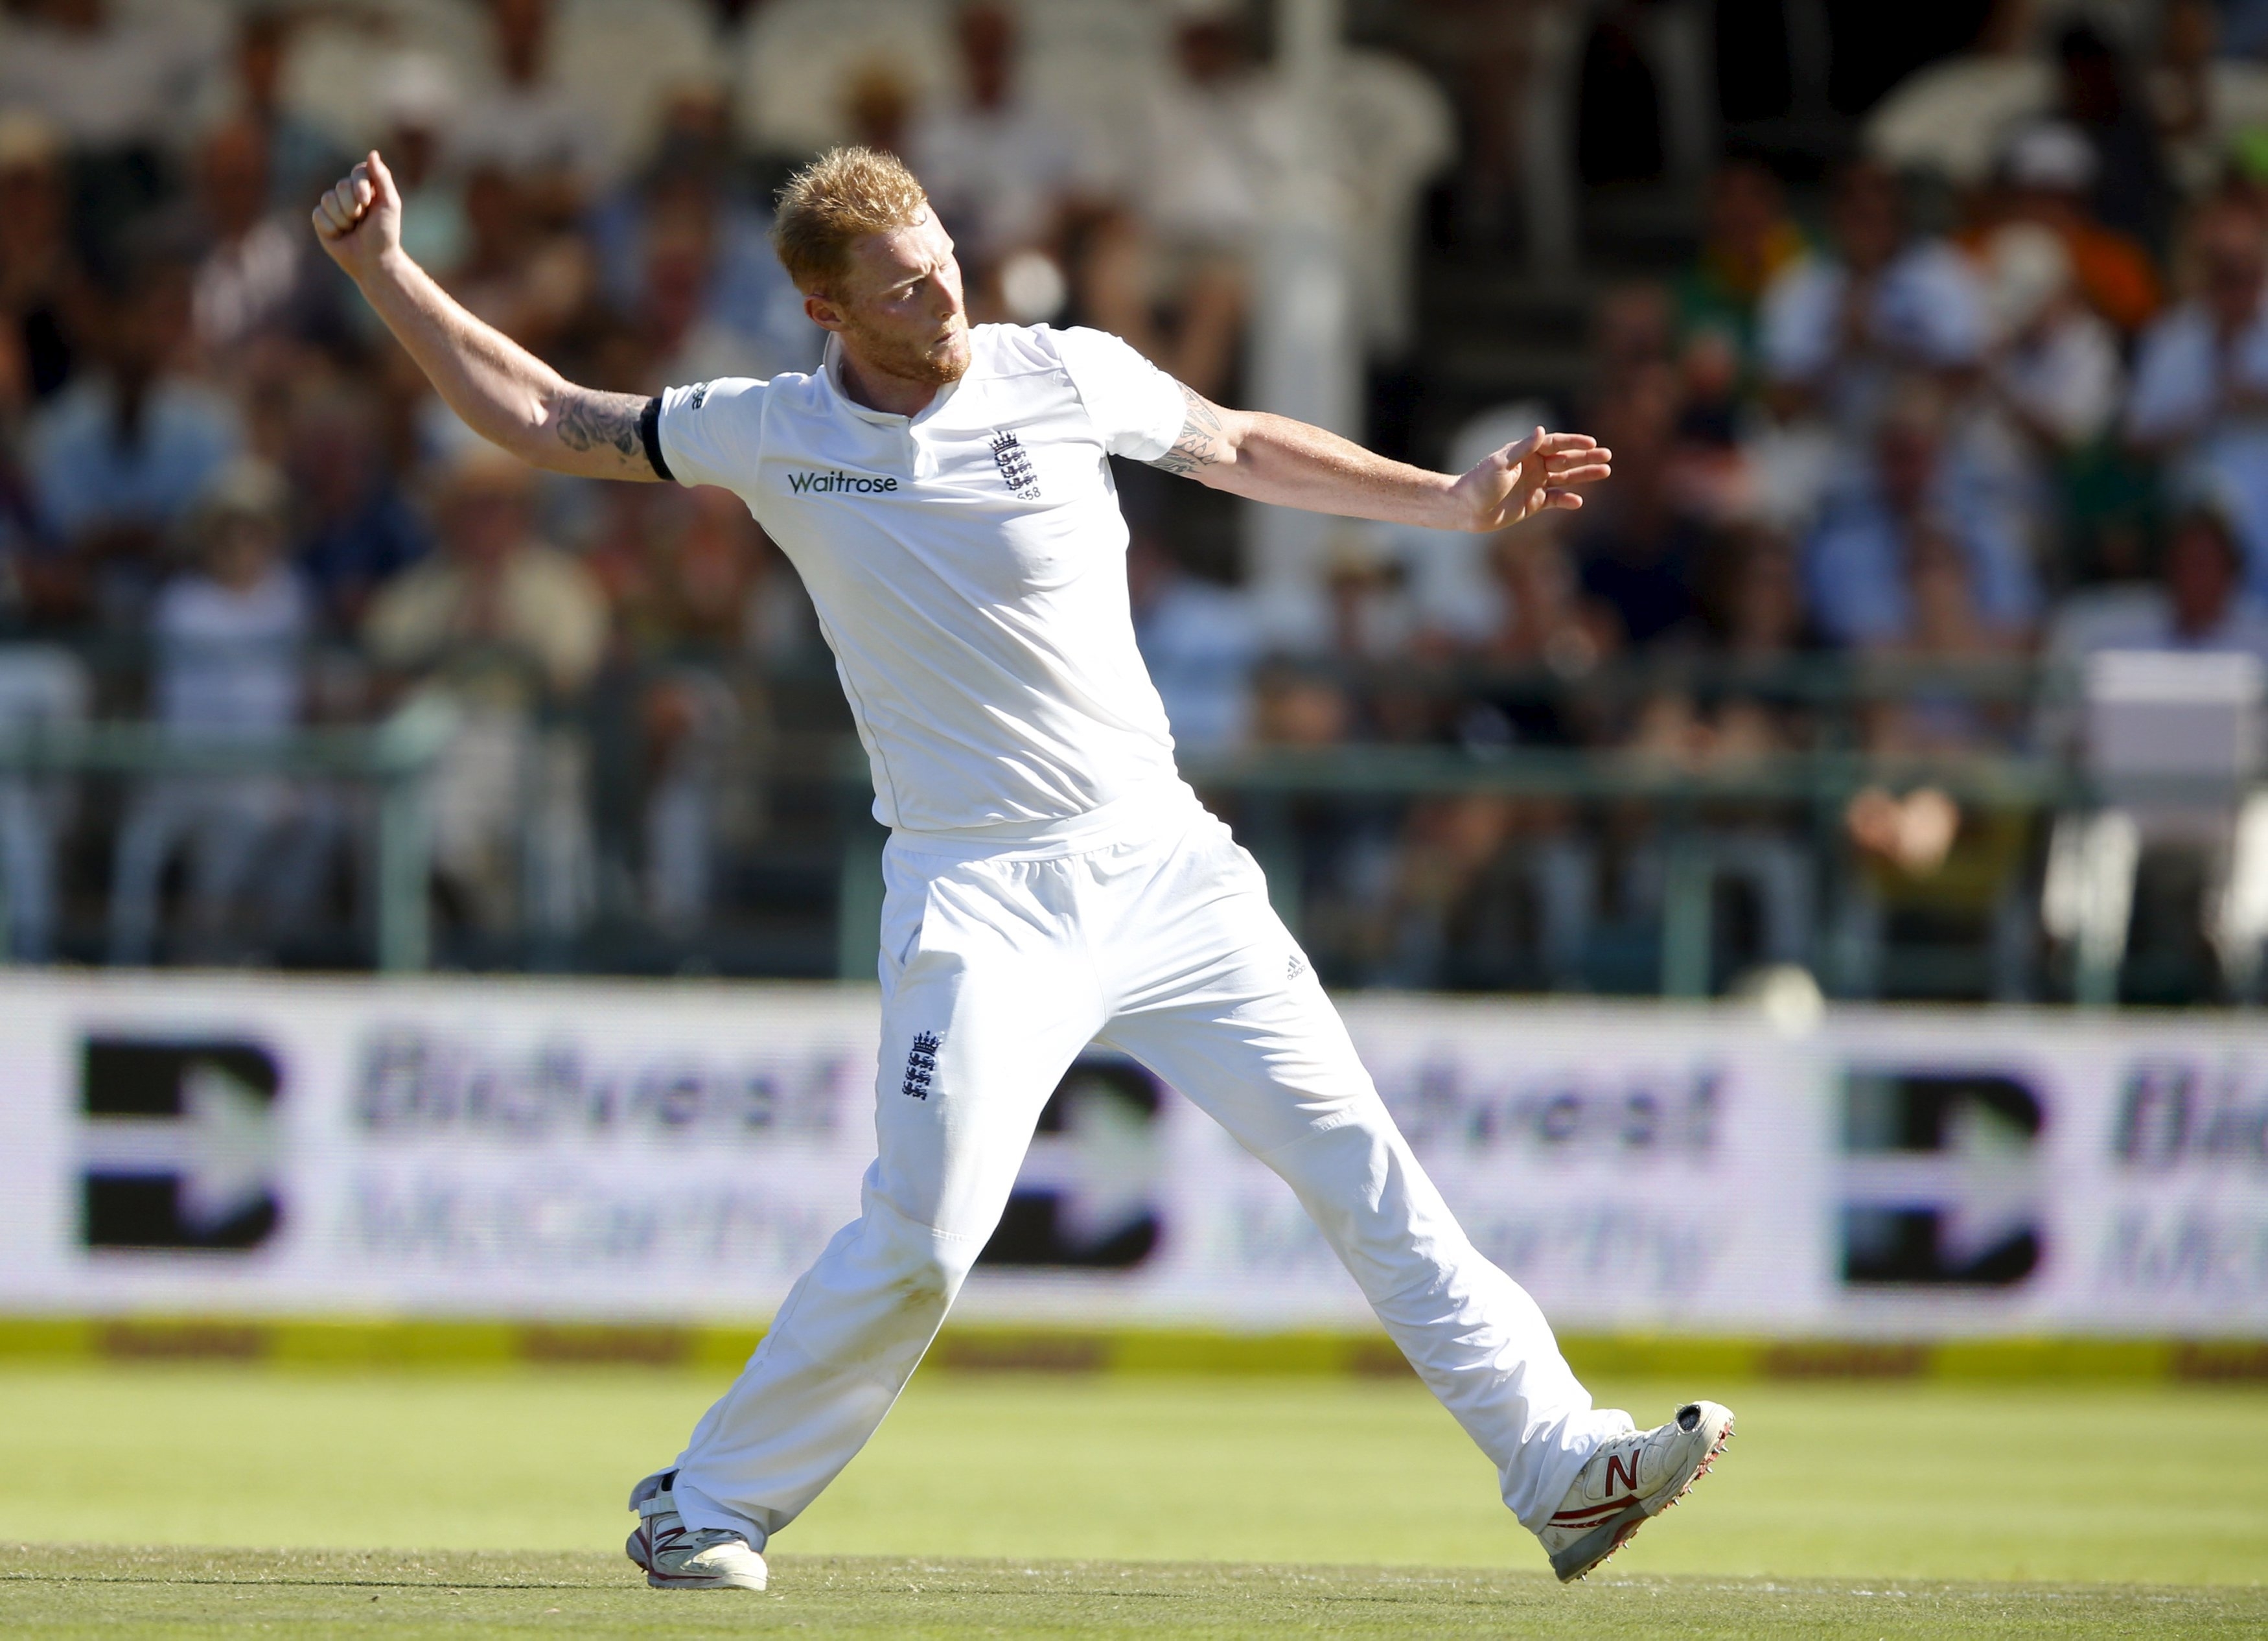 NZ vs ENG 2018: Stokes' return to England Test squad a huge boost, says Joe Root3500 x 2532